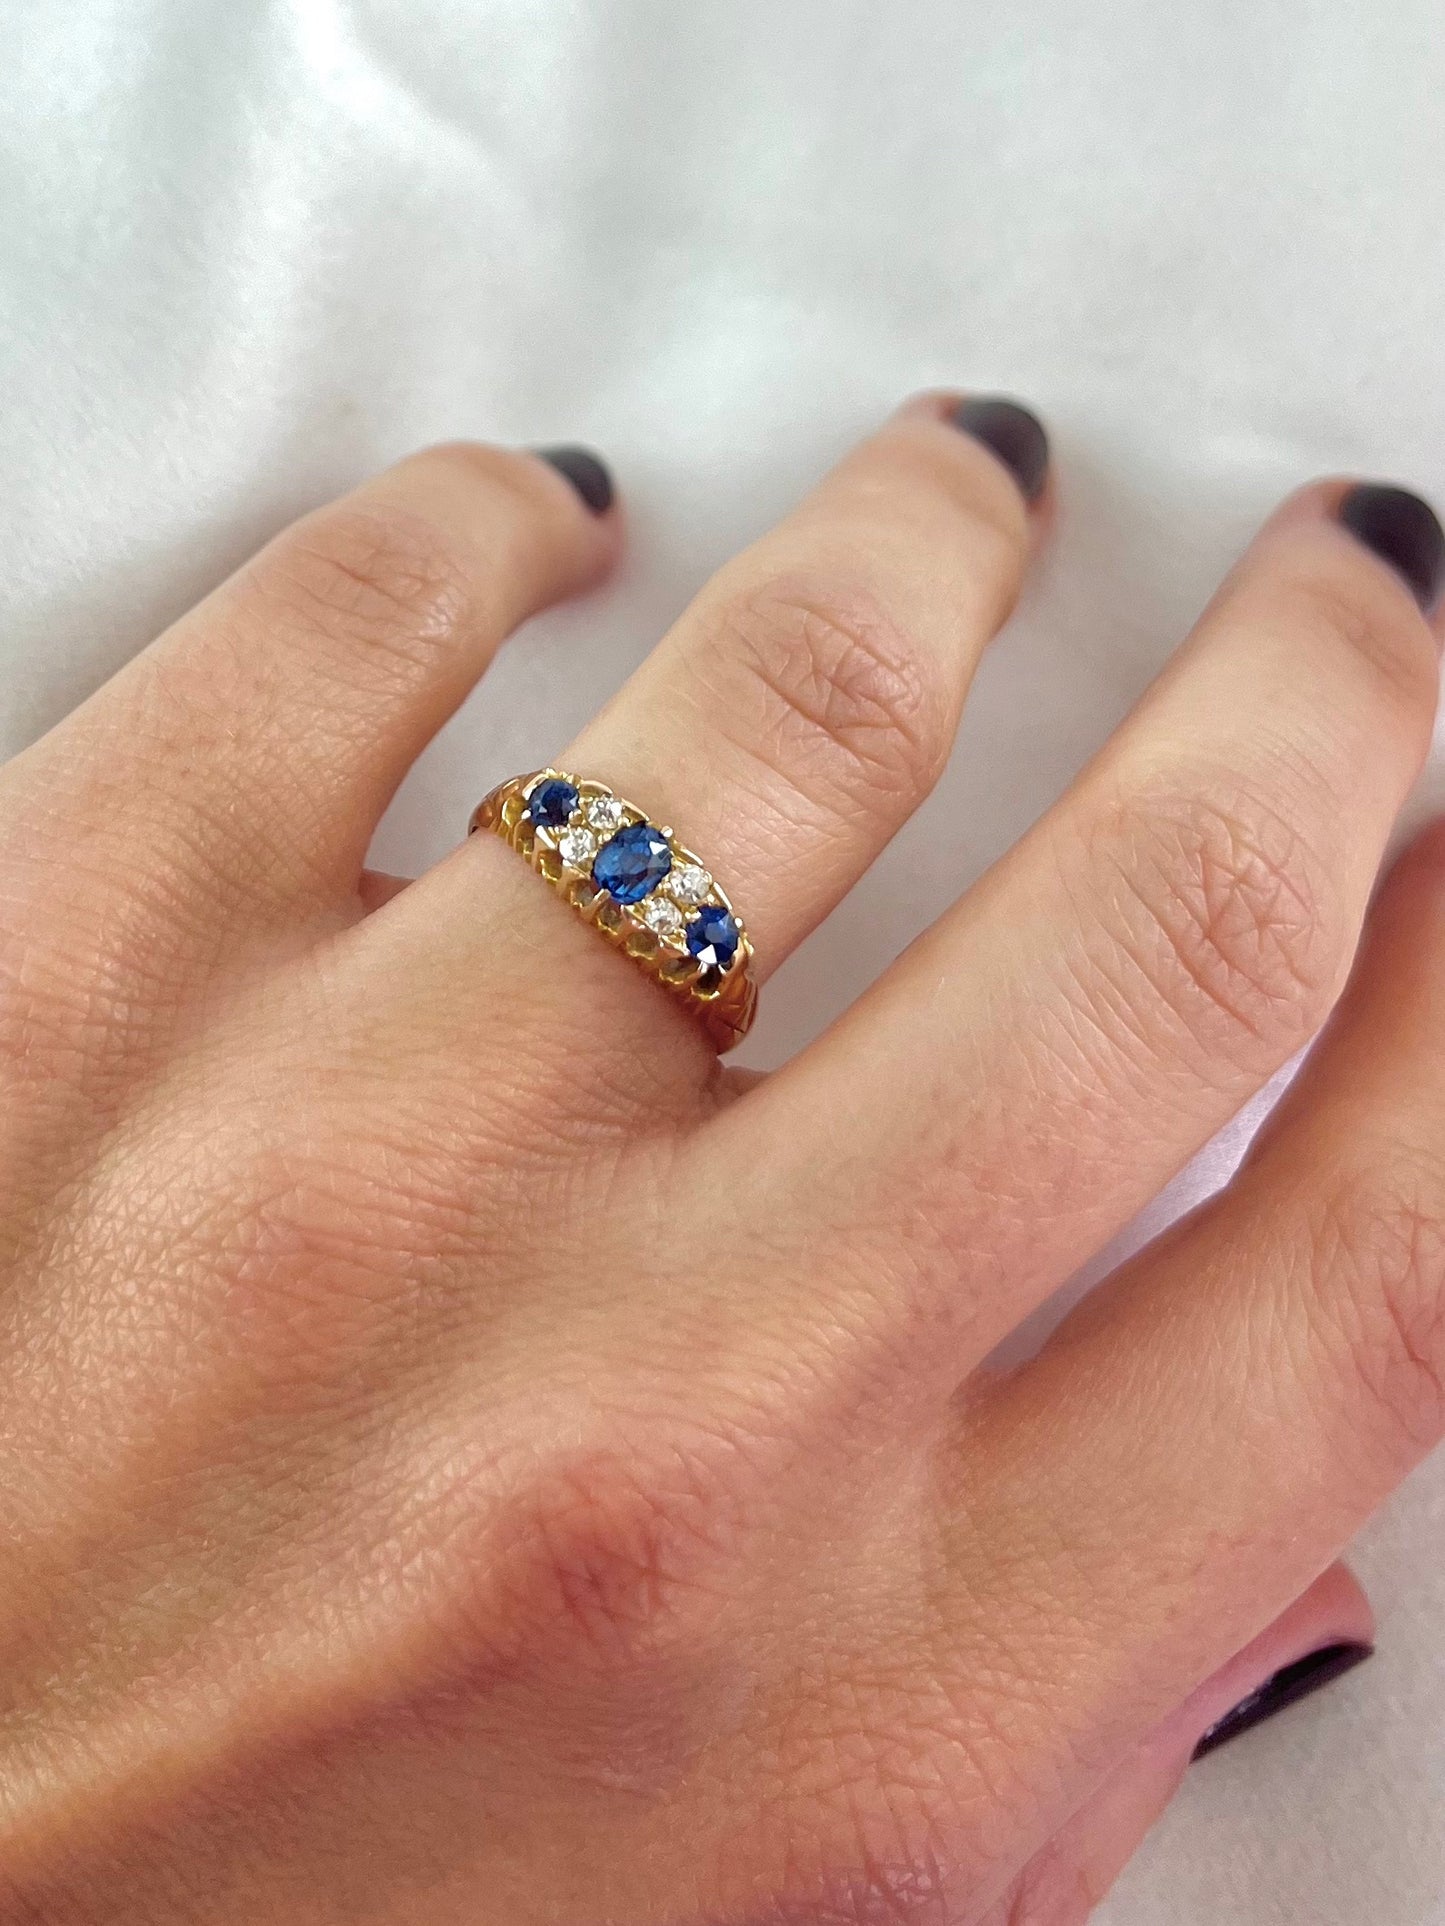 Antique Edwardian 18ct Gold Sapphire and Diamond Engagement Ring, Size O + 0.5 1903